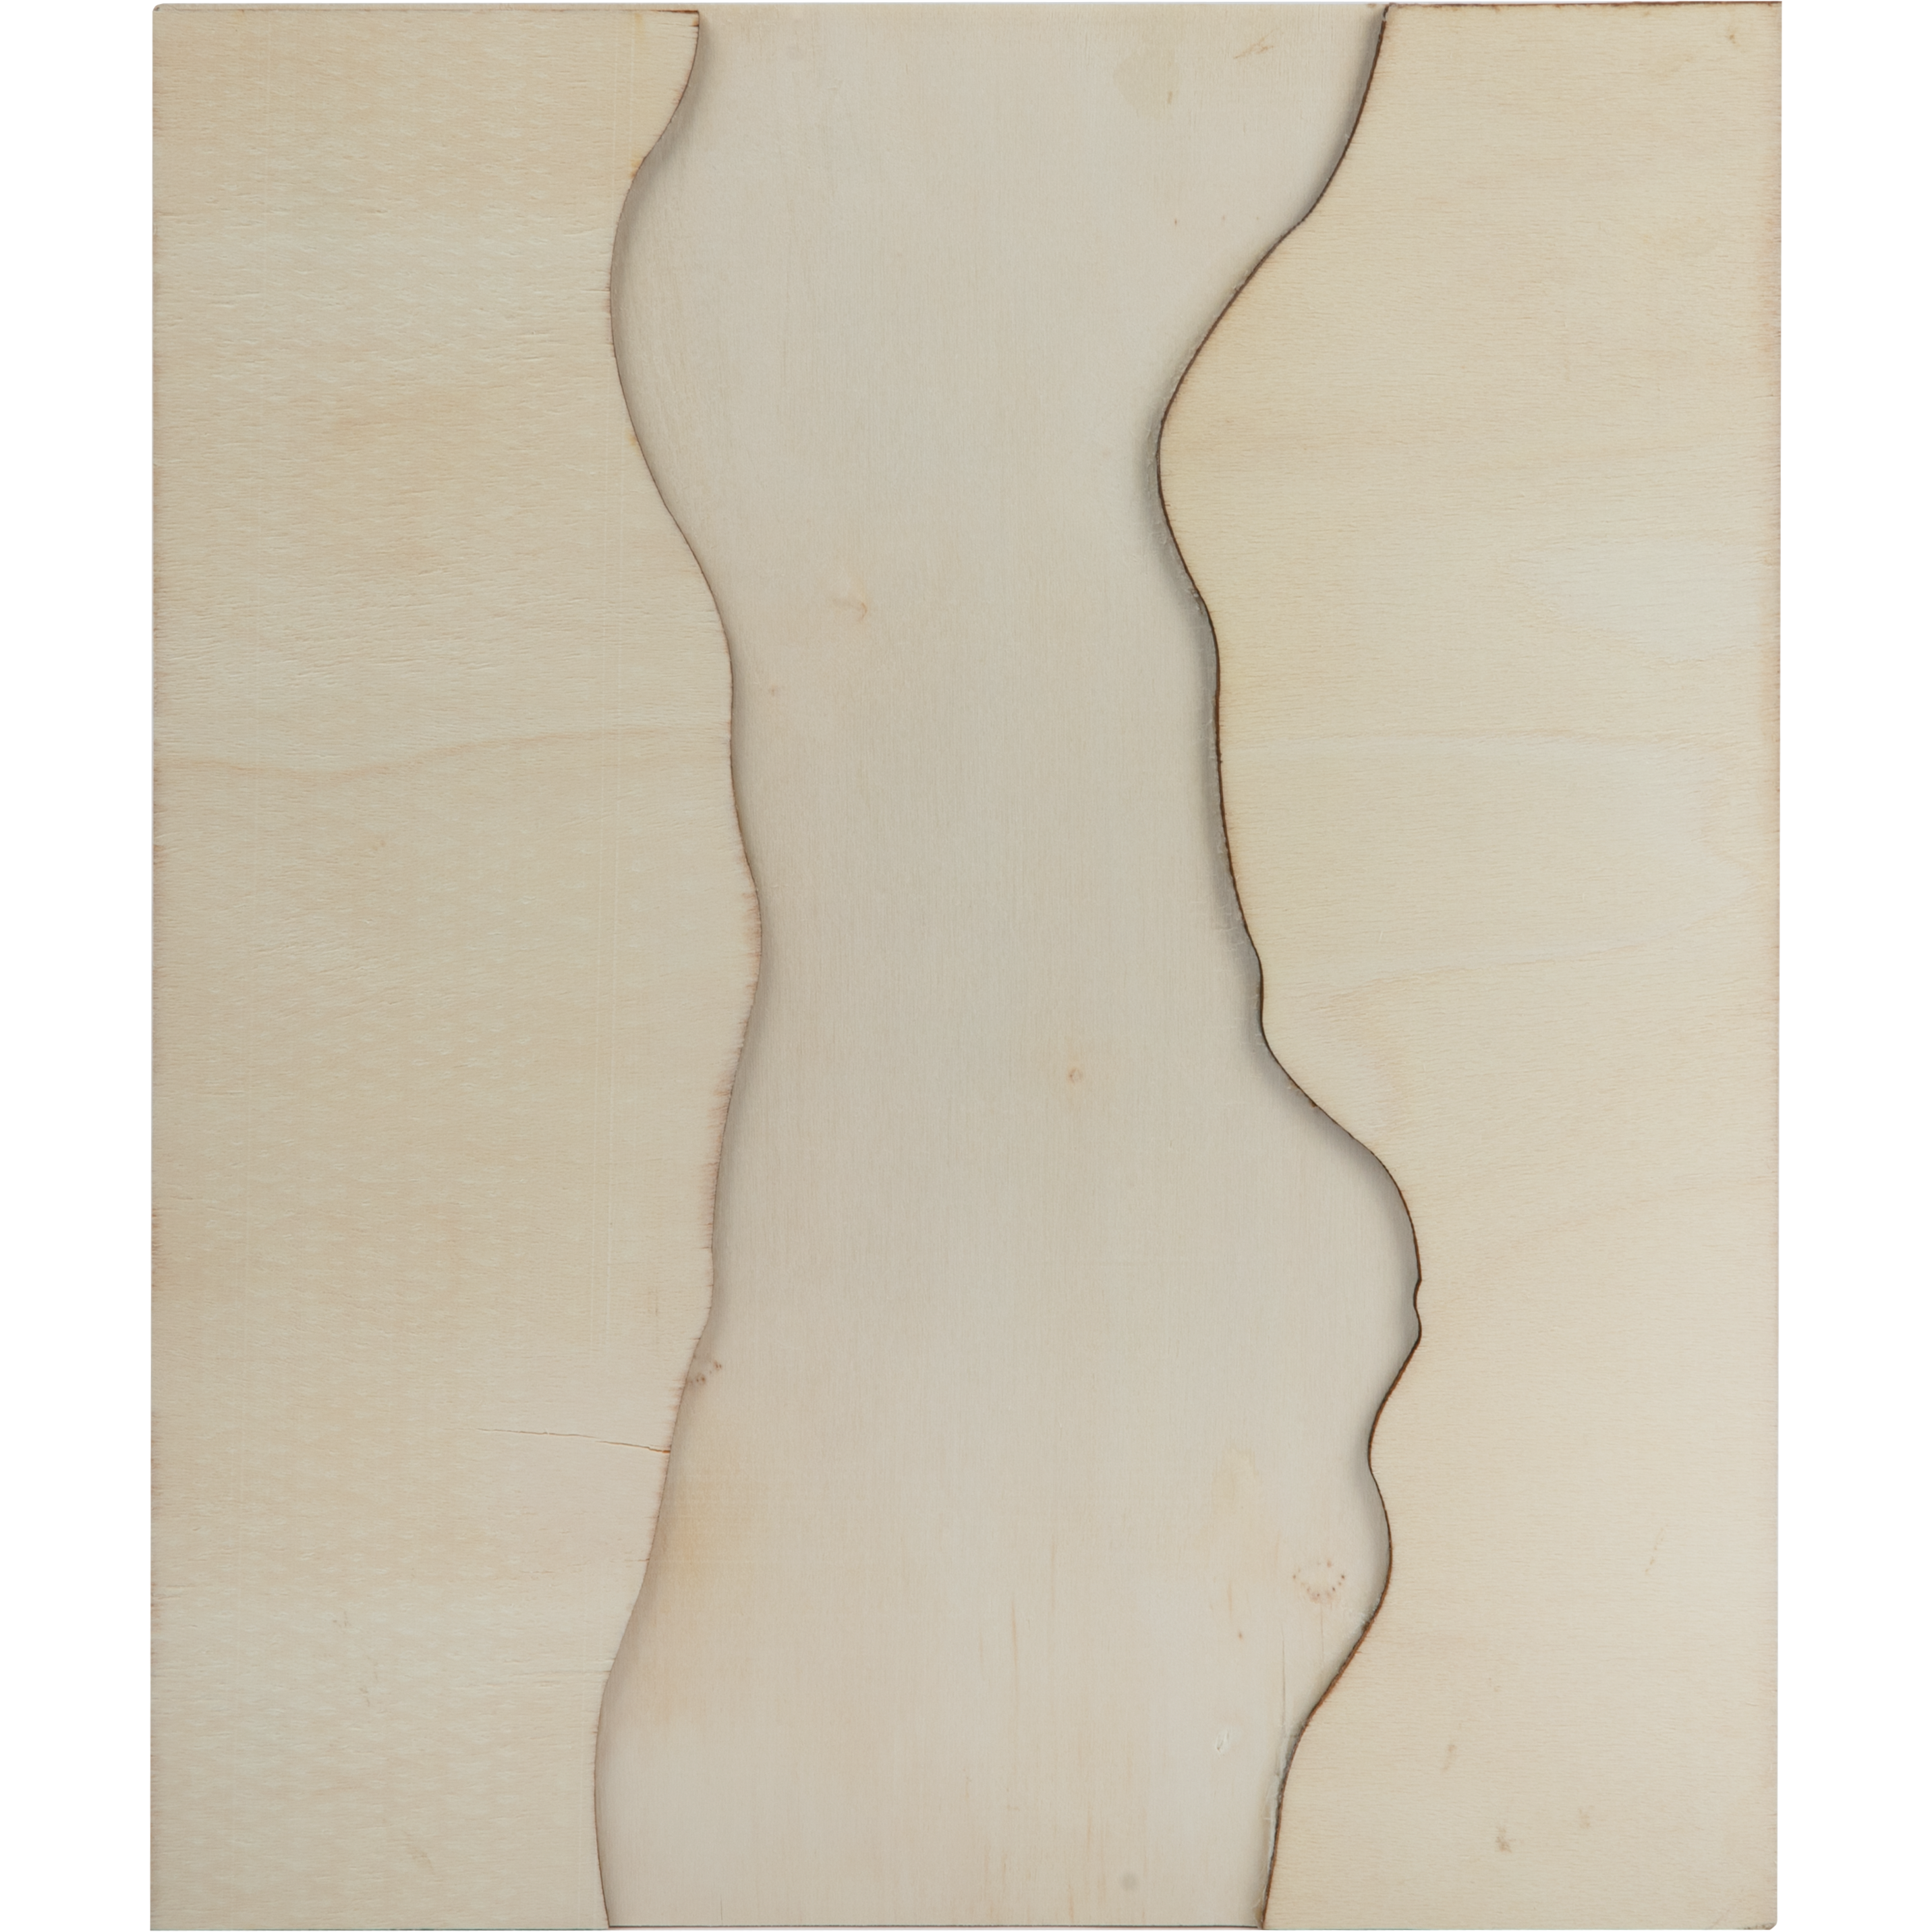 Image of Urban Crafter Plywood River Board for Resin 30.3 x 25.3 x 0.8cm